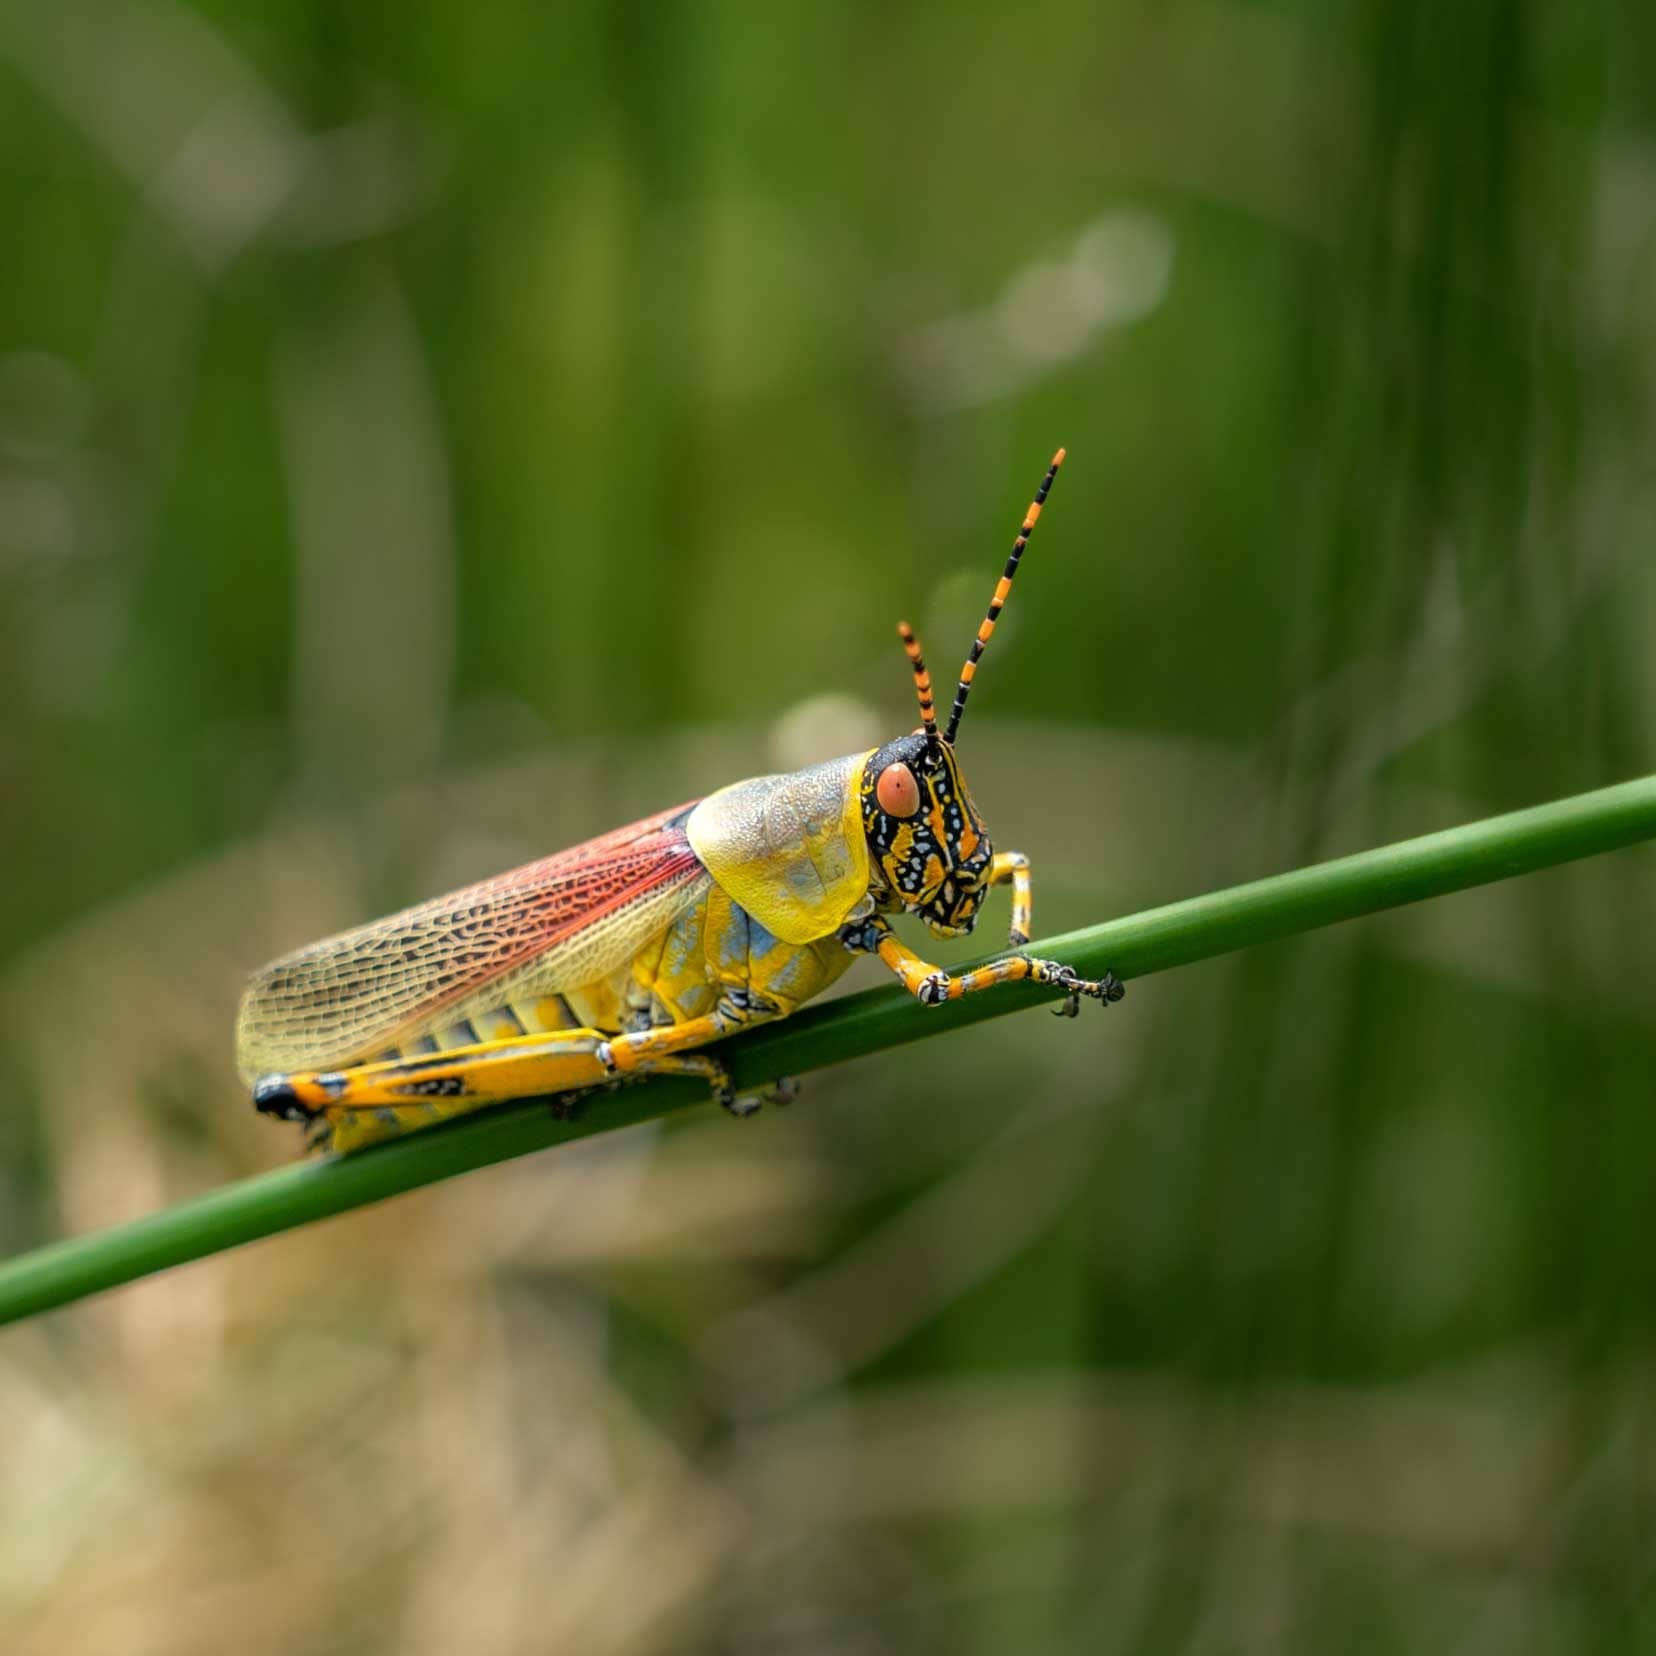 Elegant grasshopper in iSimangaliso wetlands with red, yellow and black skin and red and black striped antenna